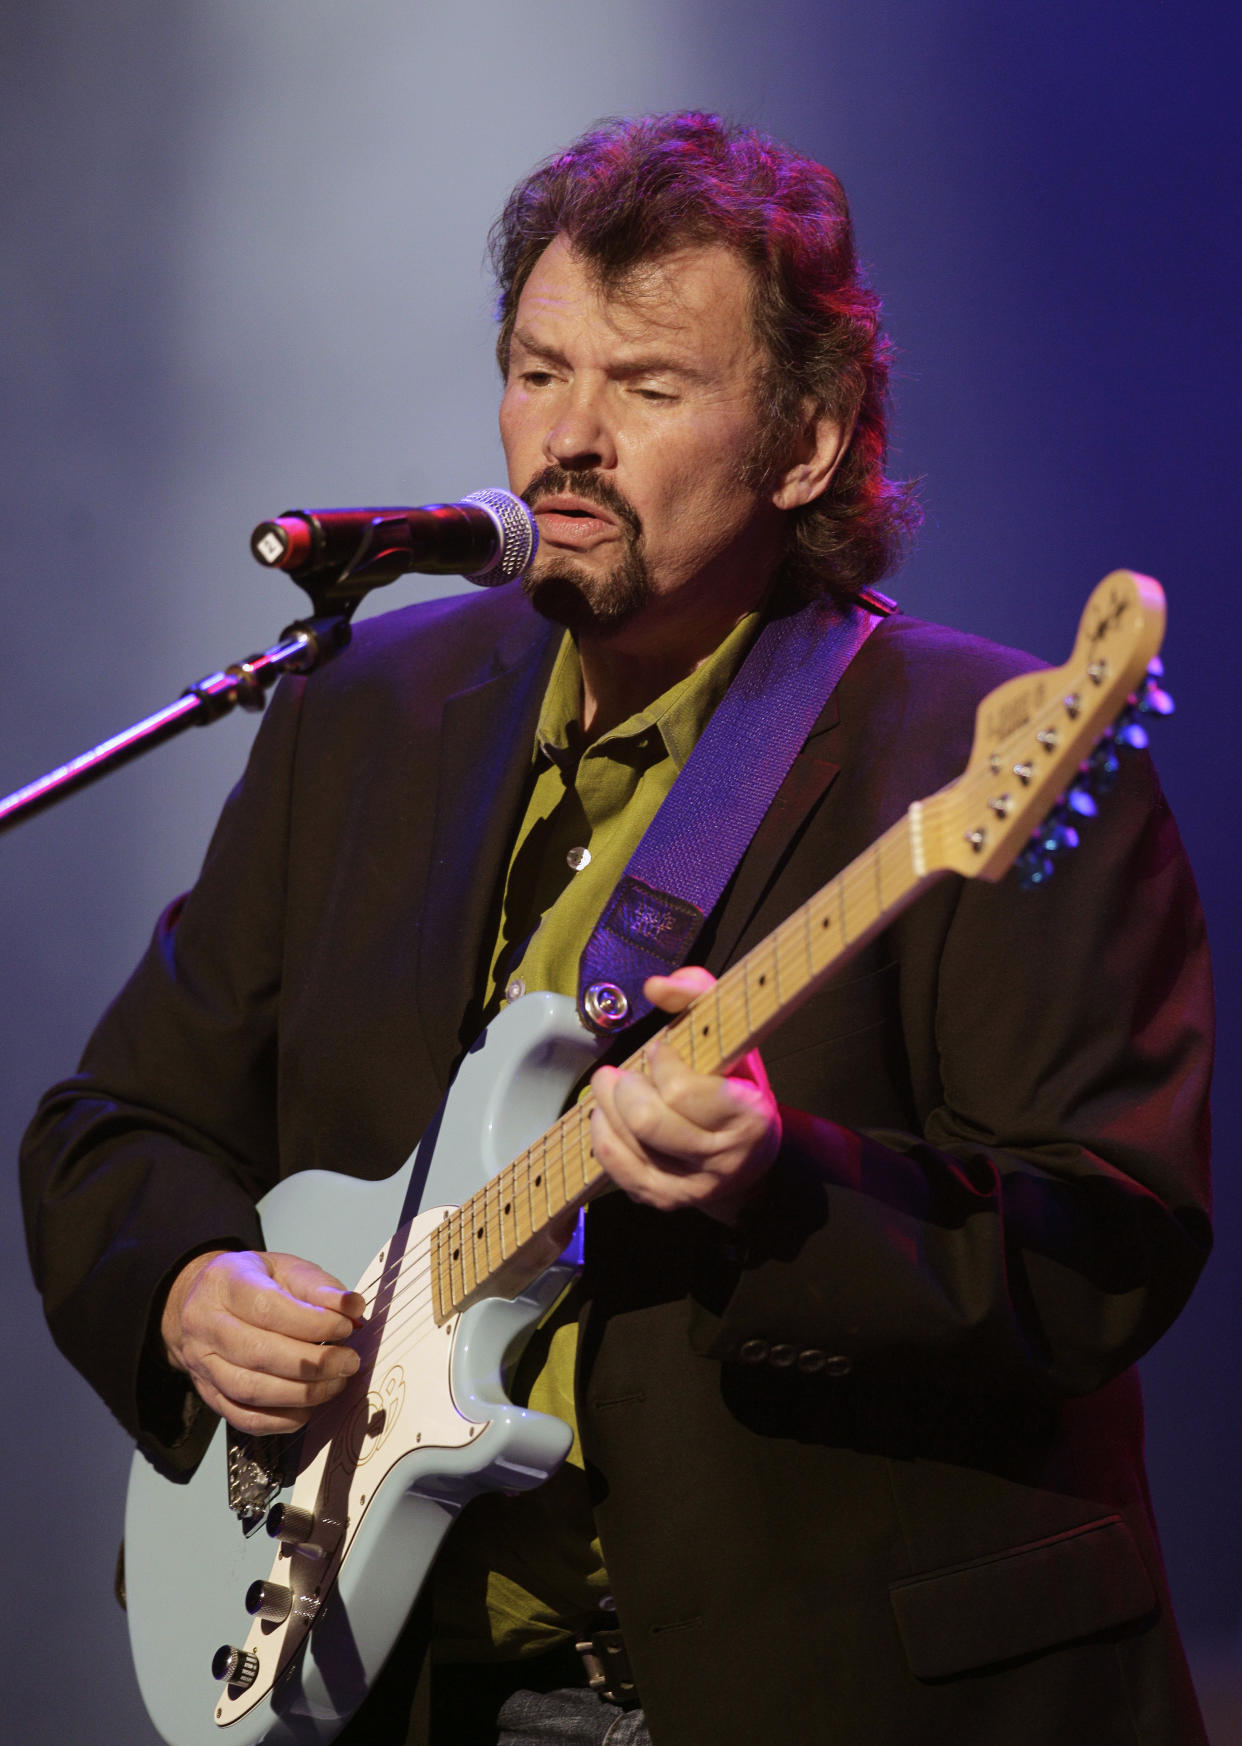 FILE - Jeff Cook of Alabama performs during the All for the Hall concert, benefitting the Country Music Hall of Fame and Museum, in Nashville, Tenn., on April 10, 2012. Cook died Nov. 7, 2022 at his home in Destin, Fla. He was 73. (AP Photo/Mark Humphrey, File)